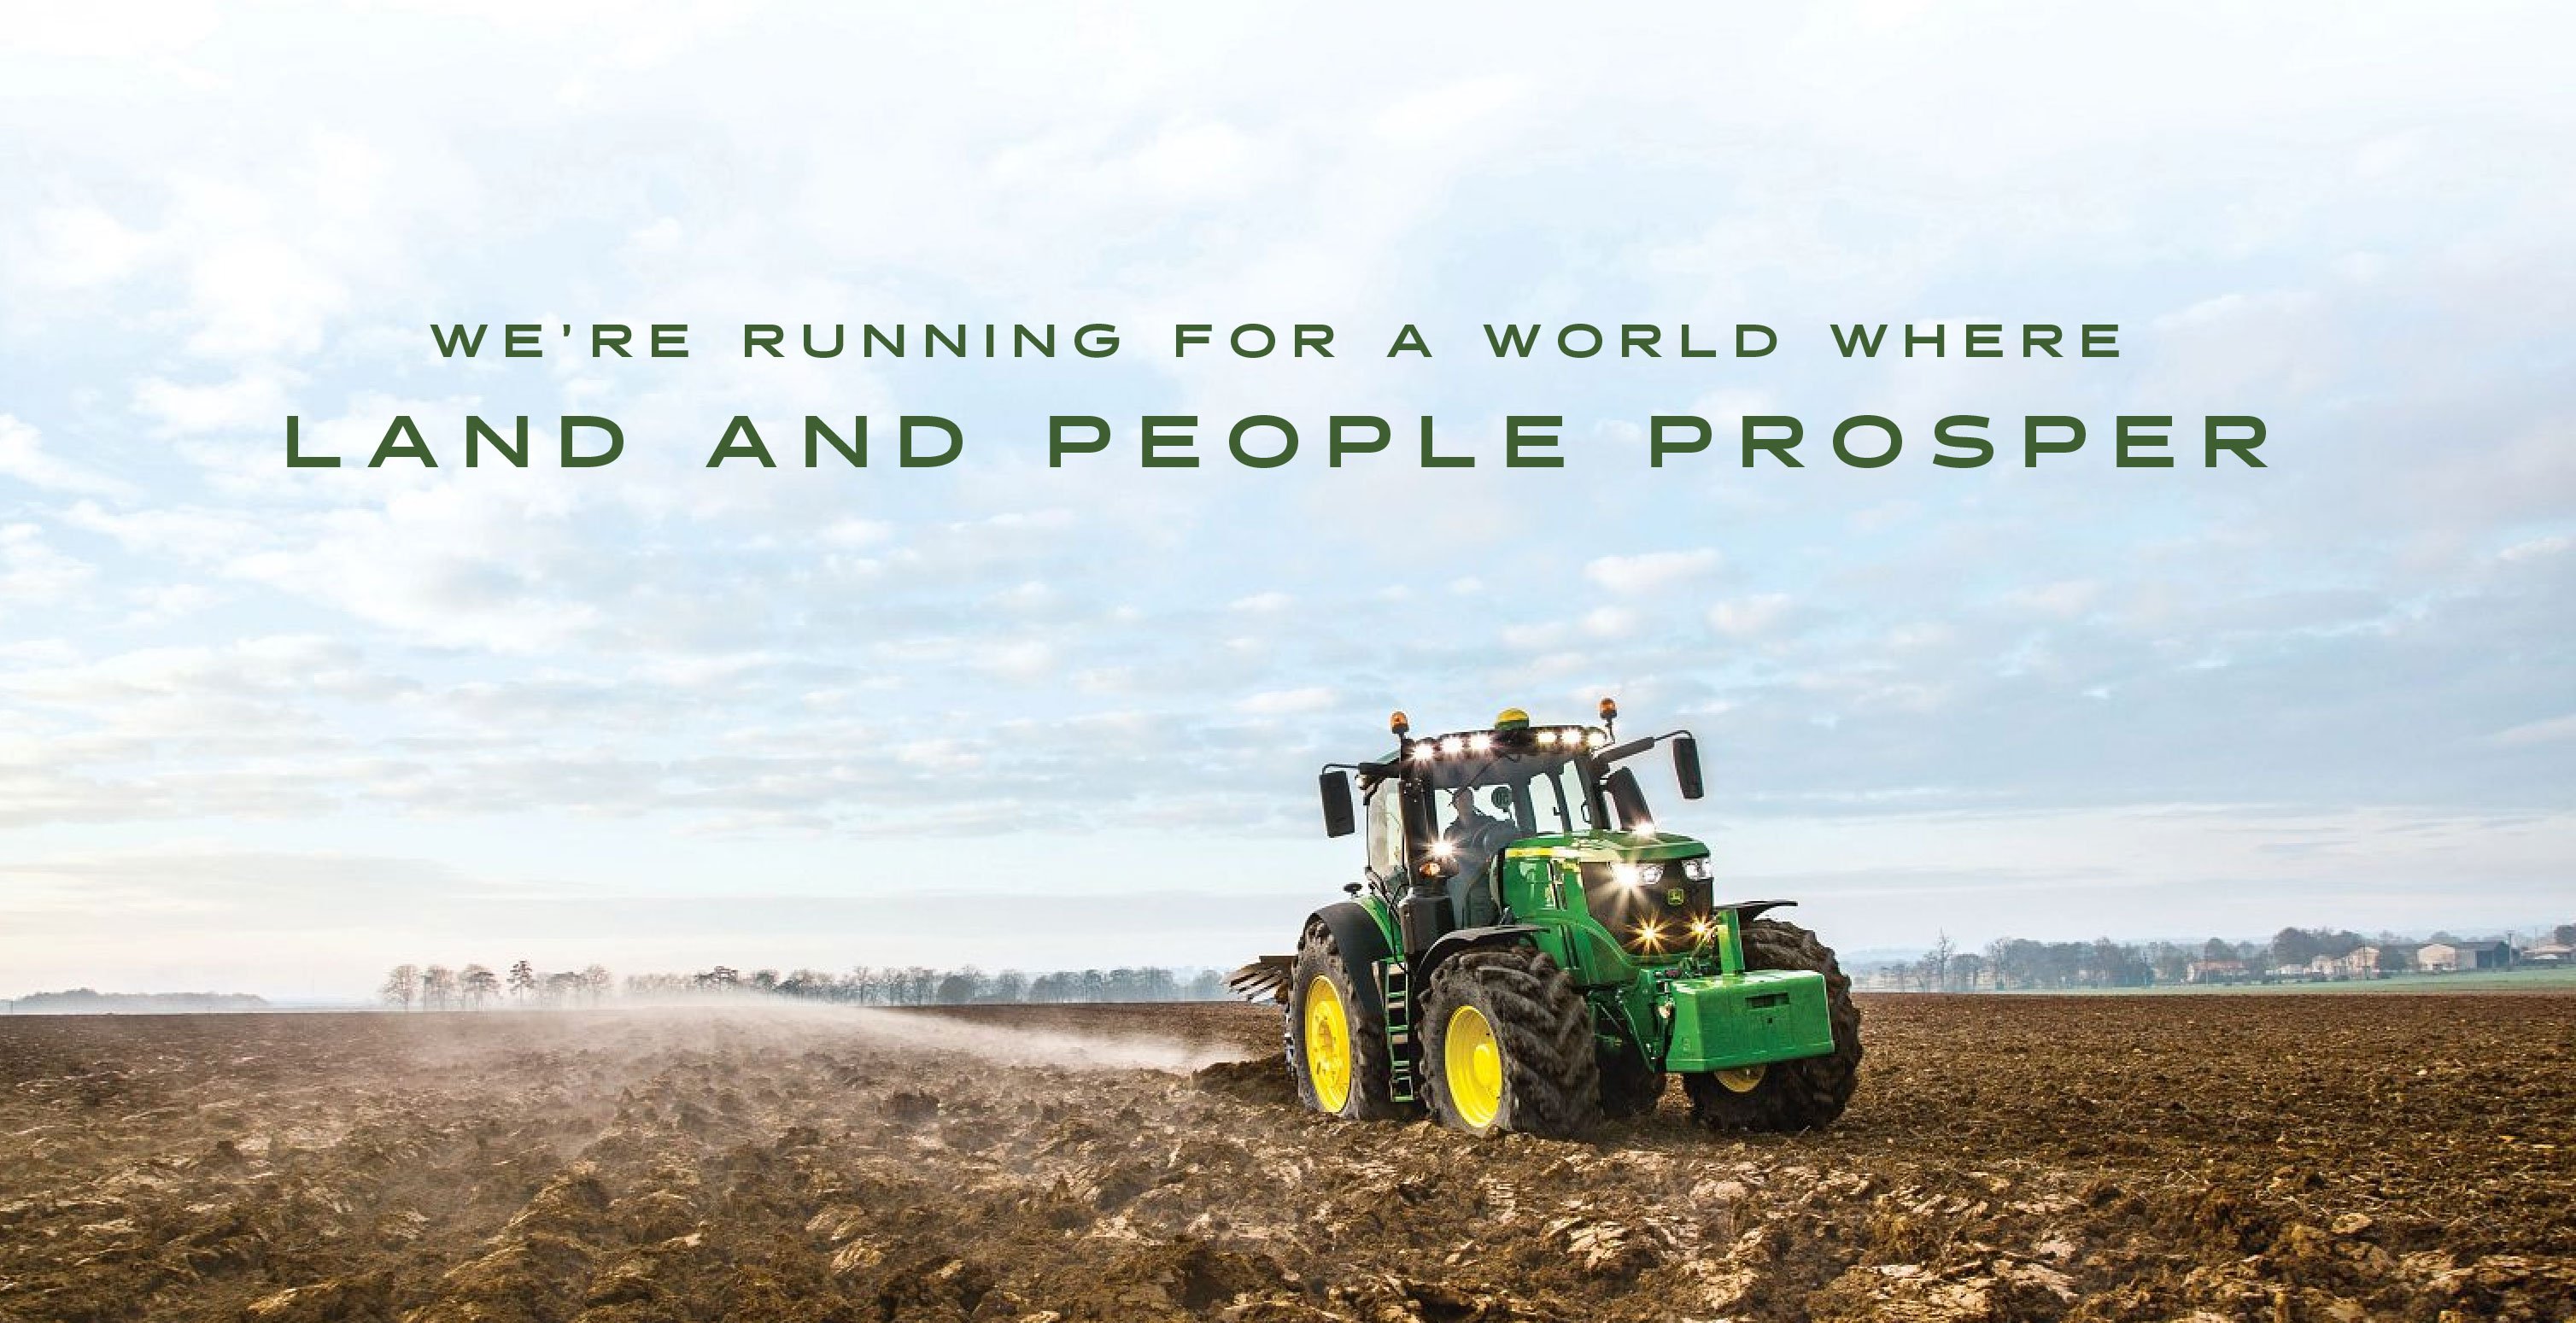 john deere tractor plowing field with text that says we're running for a wold where land and people prosper